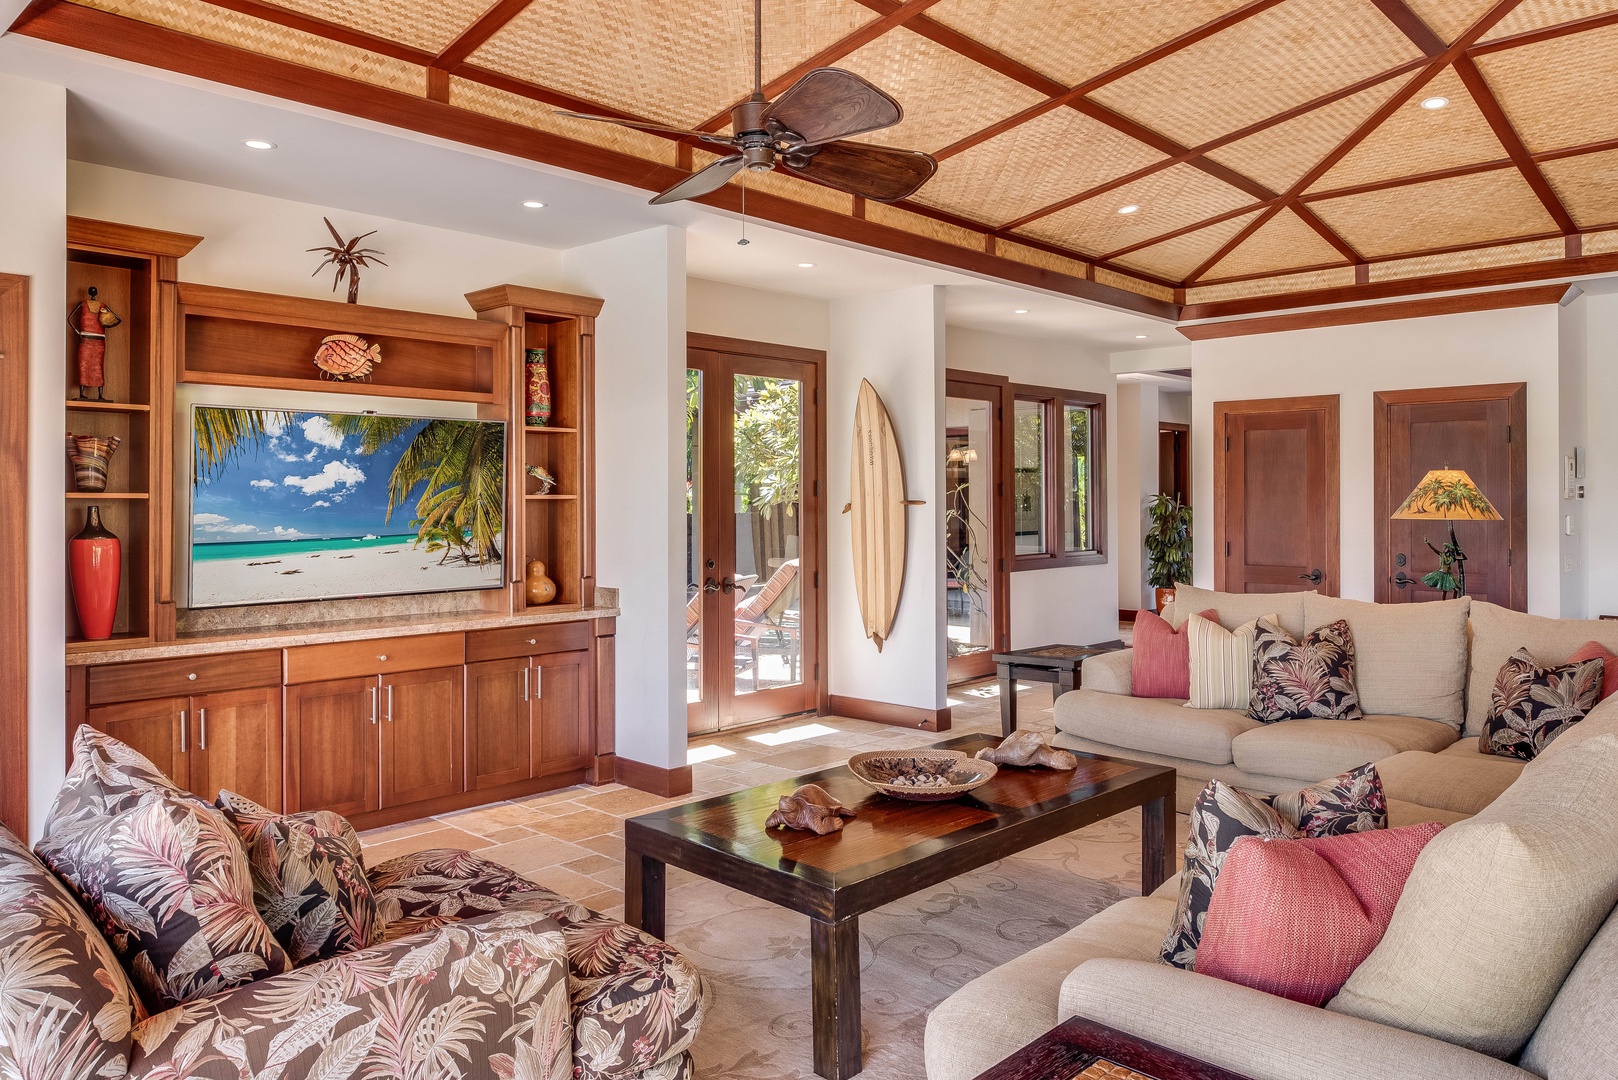 Kamuela Vacation Rentals, House of the Turtle at Champion Ridge, Mauna Lani (CR 18) - Never miss watching an episode with your family with a flat-screen smart TV in the living area.